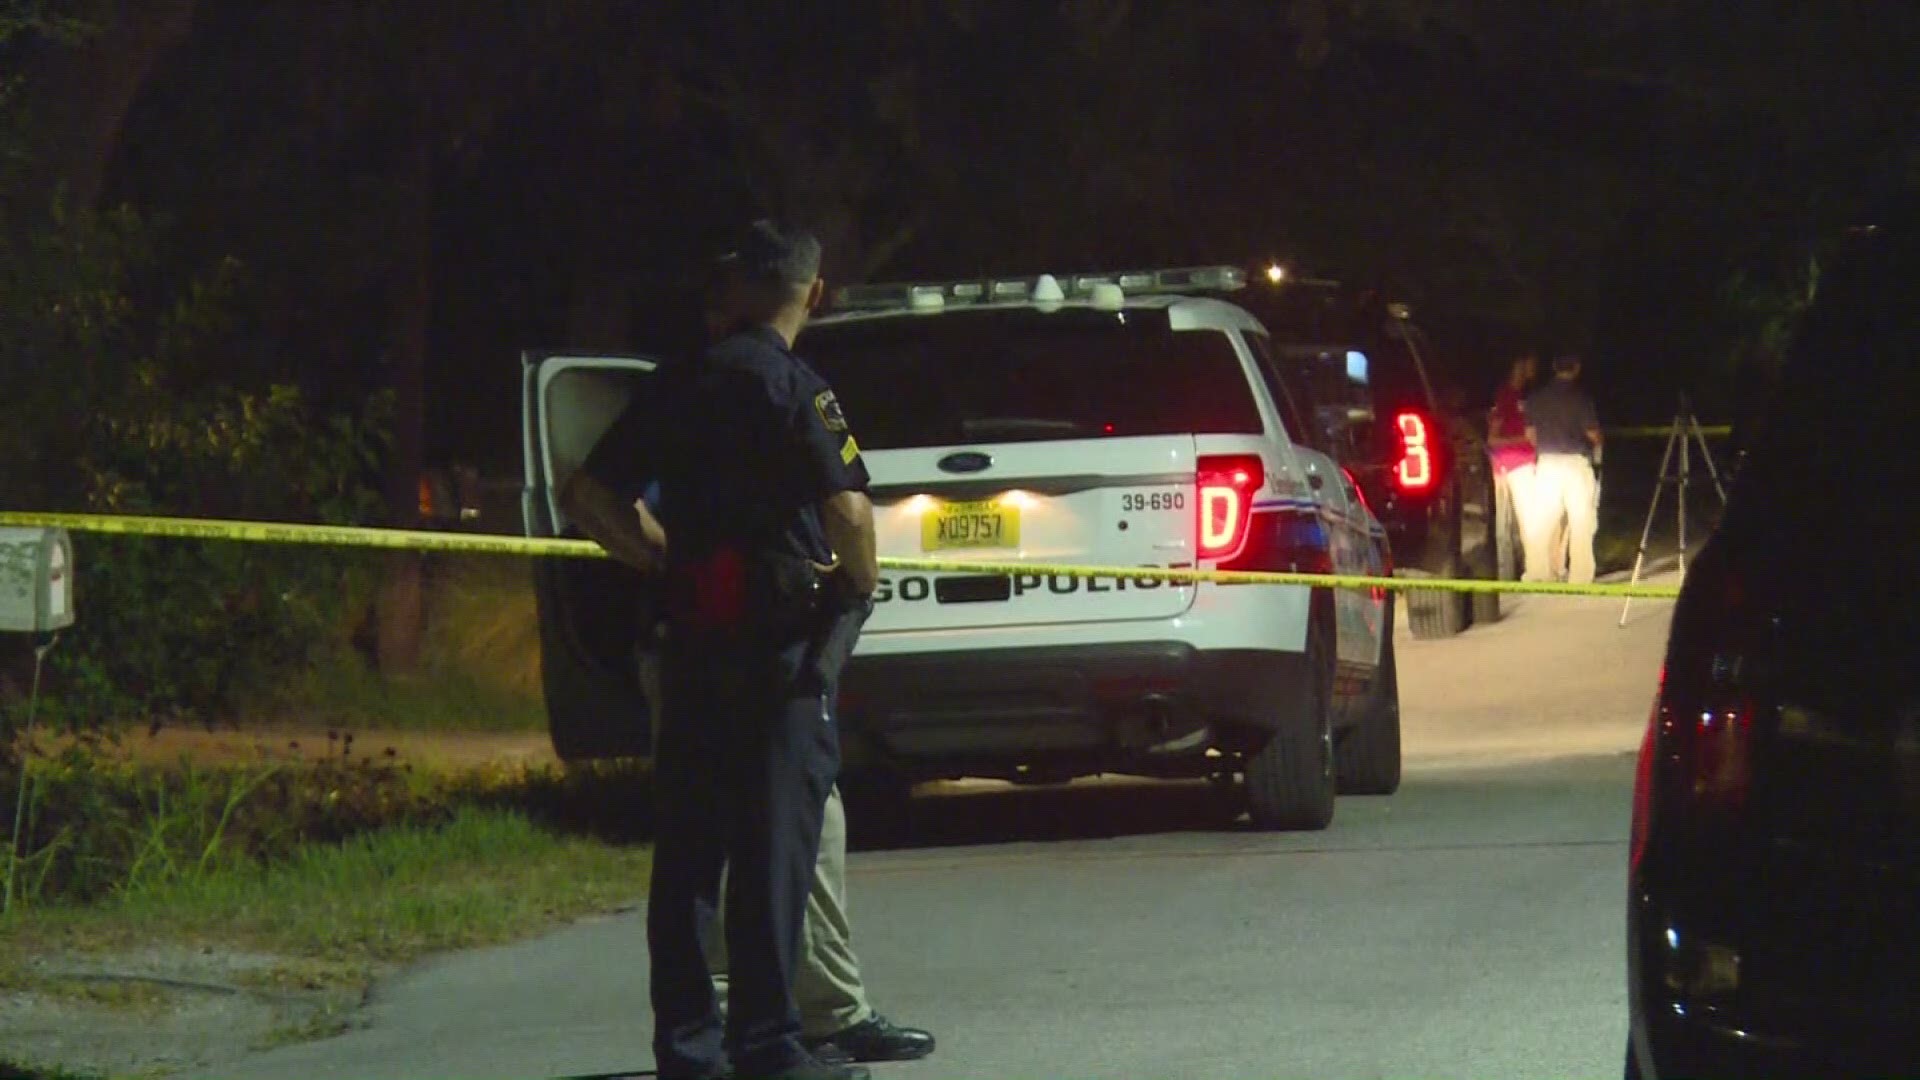 A confrontation between an angry man and a motorcyclist escalated into a shooting Thursday night in Largo, according to law enforcement. It happened just before 10 p.m. on 16th Street Northwest near 6th Avenue Northwest. https://on.wtsp.com/2YVPXyX